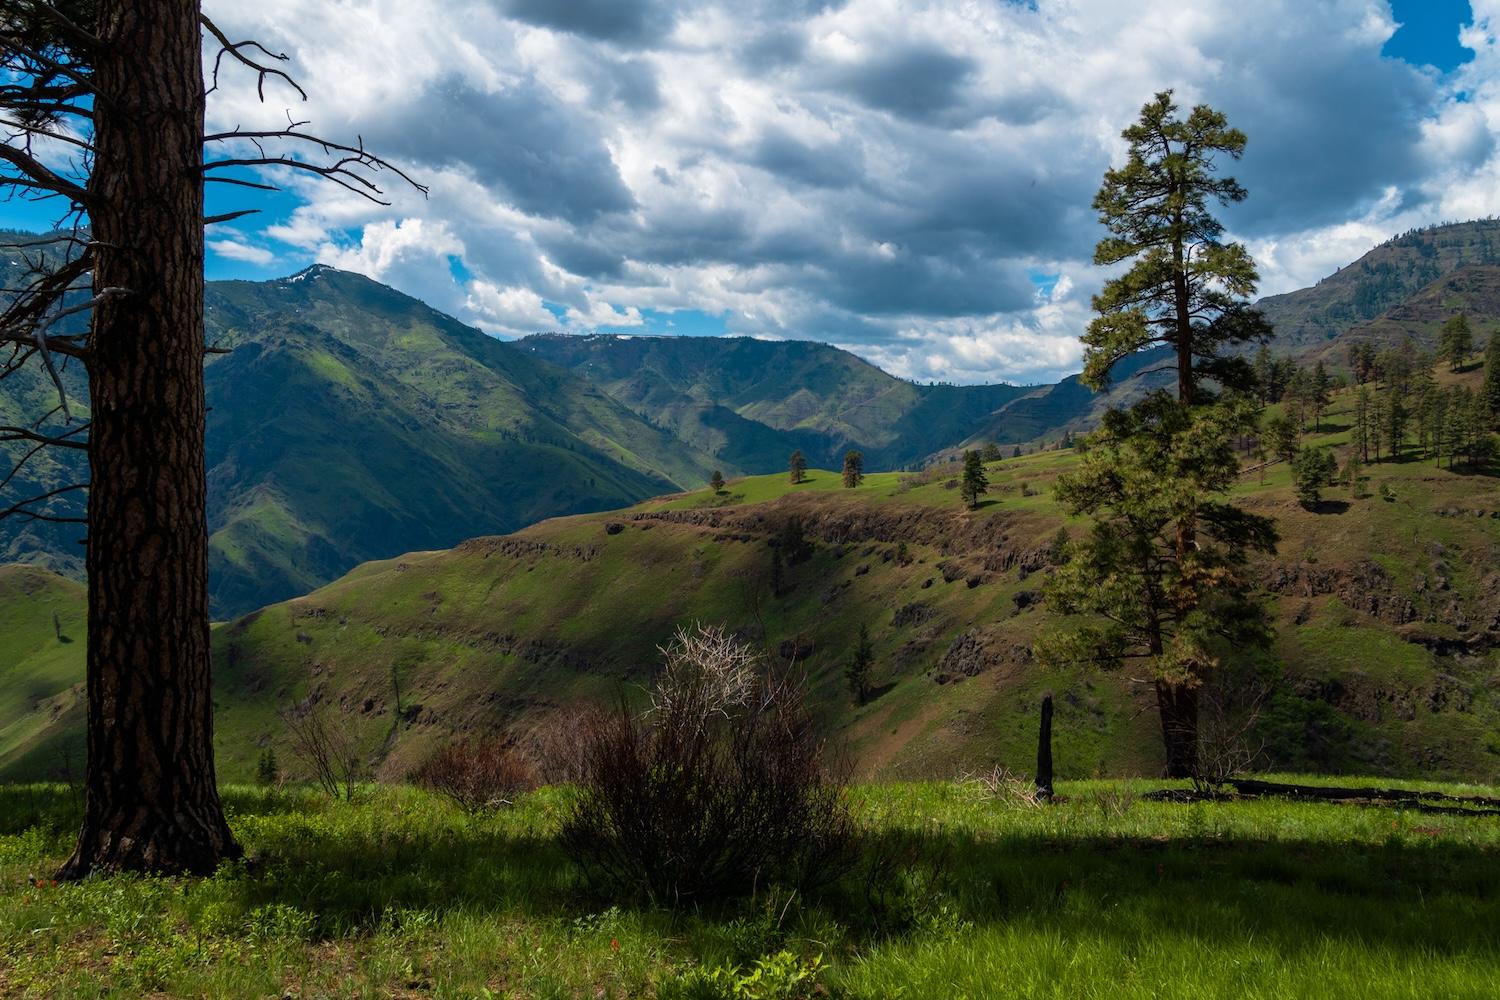 Dramatic shot of pine trees with Freezeout Saddle in the background.  Taken from the Bench Trail in Hells Canyon Oregon